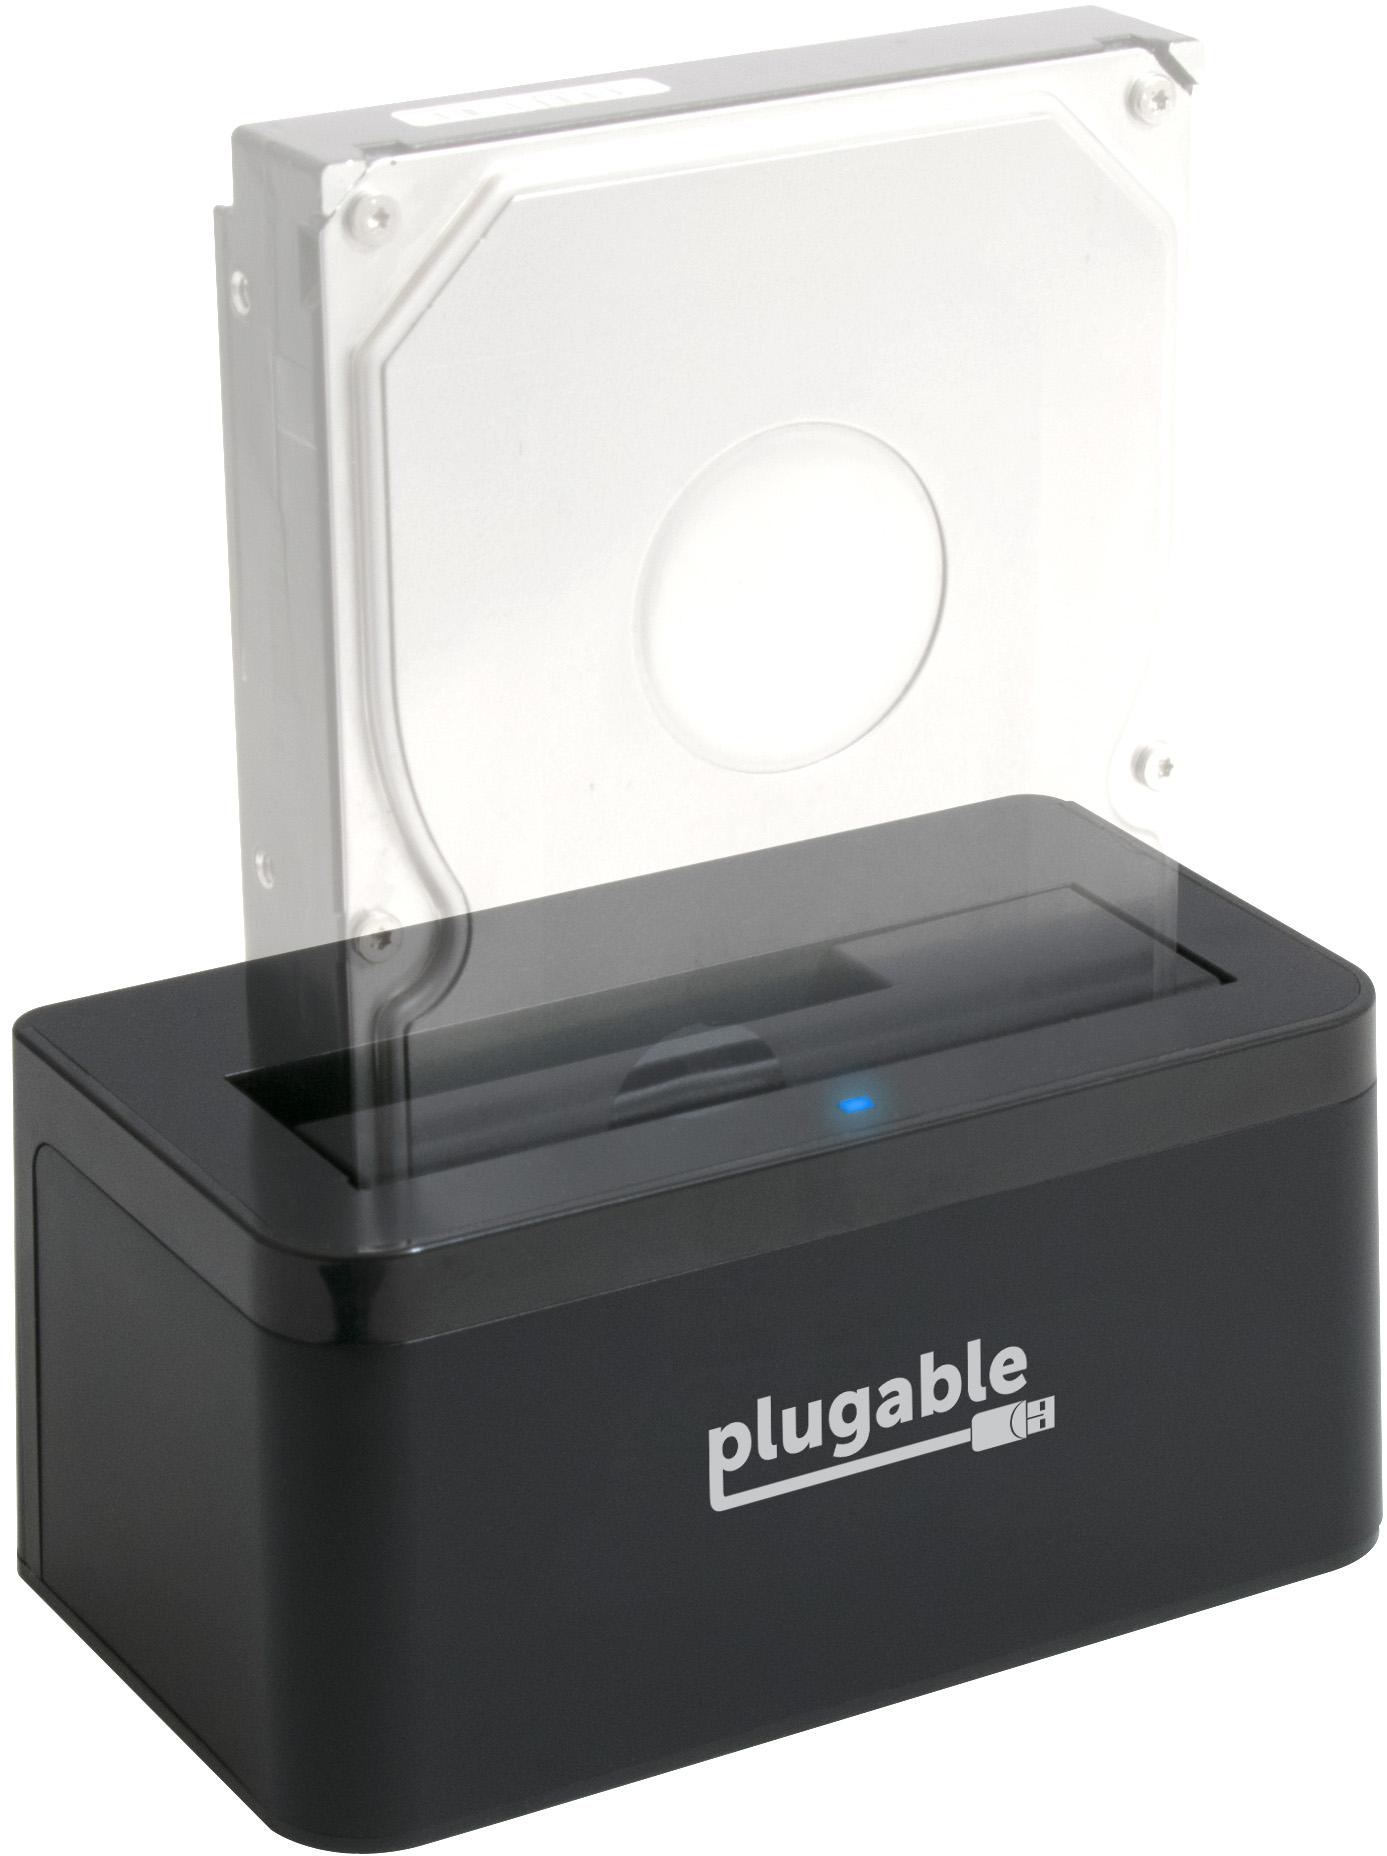 Plugable USB 3.1 Gen 2 10Gbps SATA Upright Hard Drive Dock and SSD Dock (includes both USB-C and USB 3.0 cables, supports 10TB+ drives) - image 1 of 6